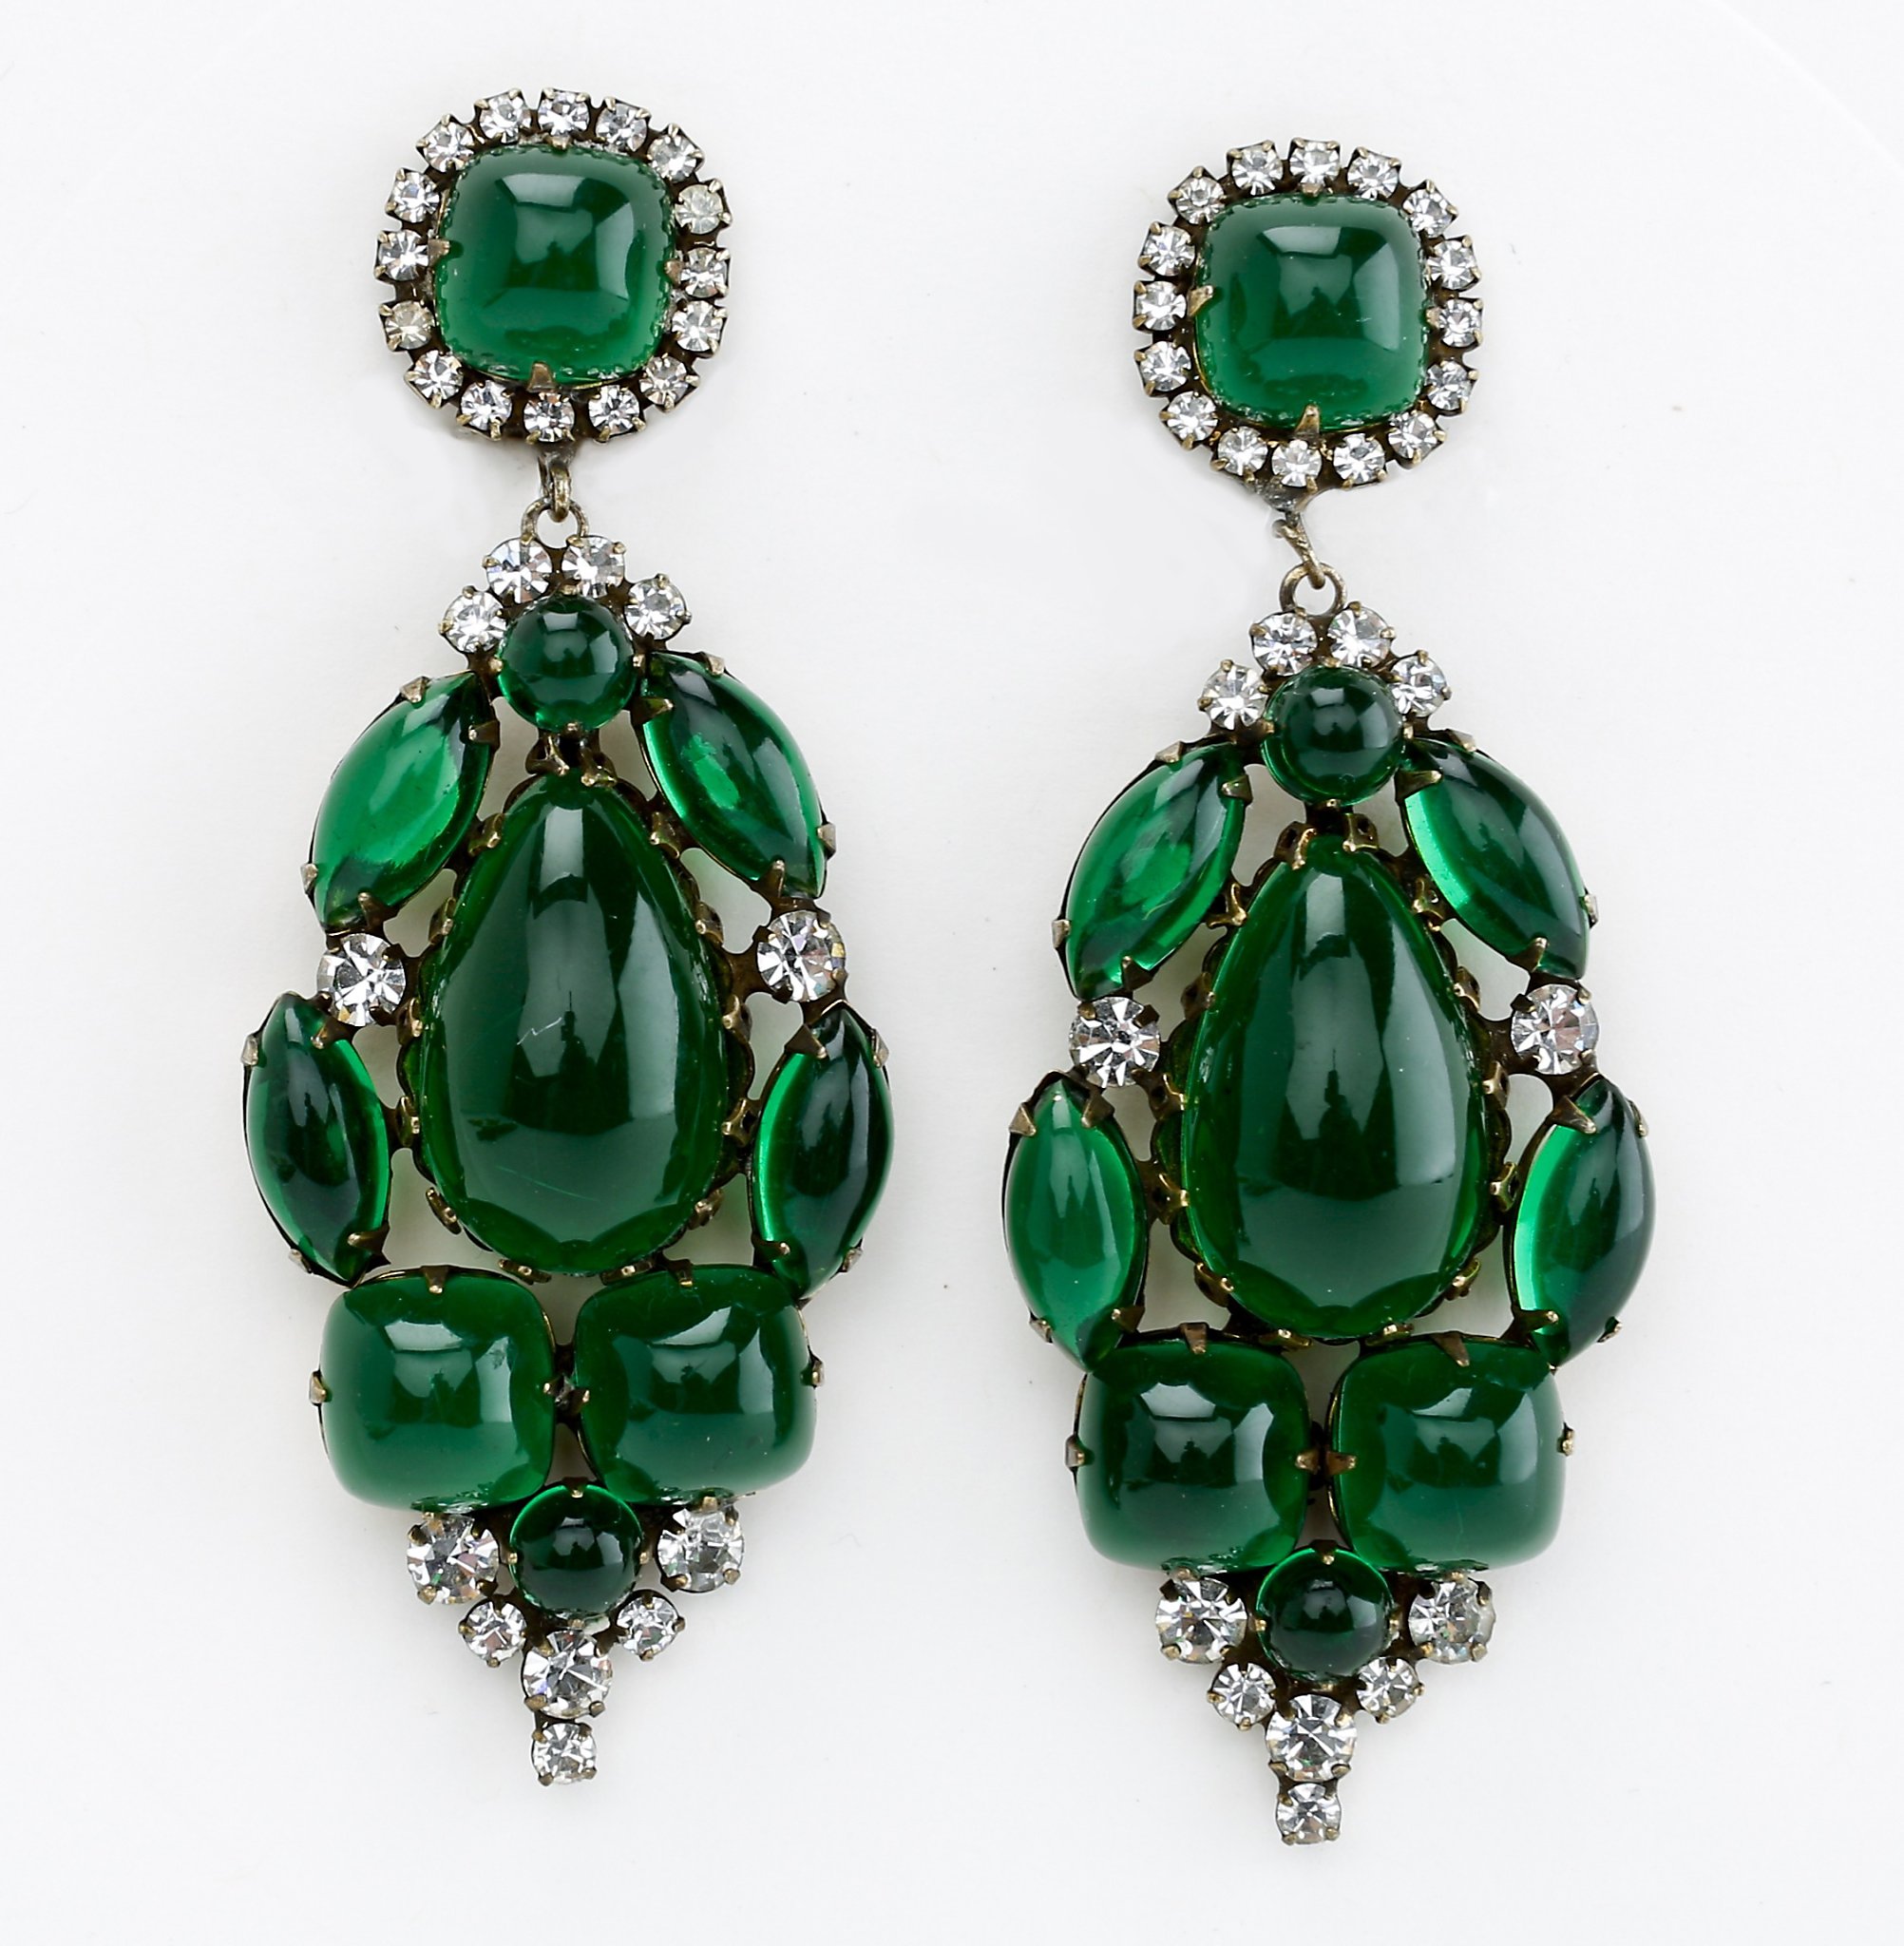 MDVII - big and bold vintage couture jewelry - SFGate